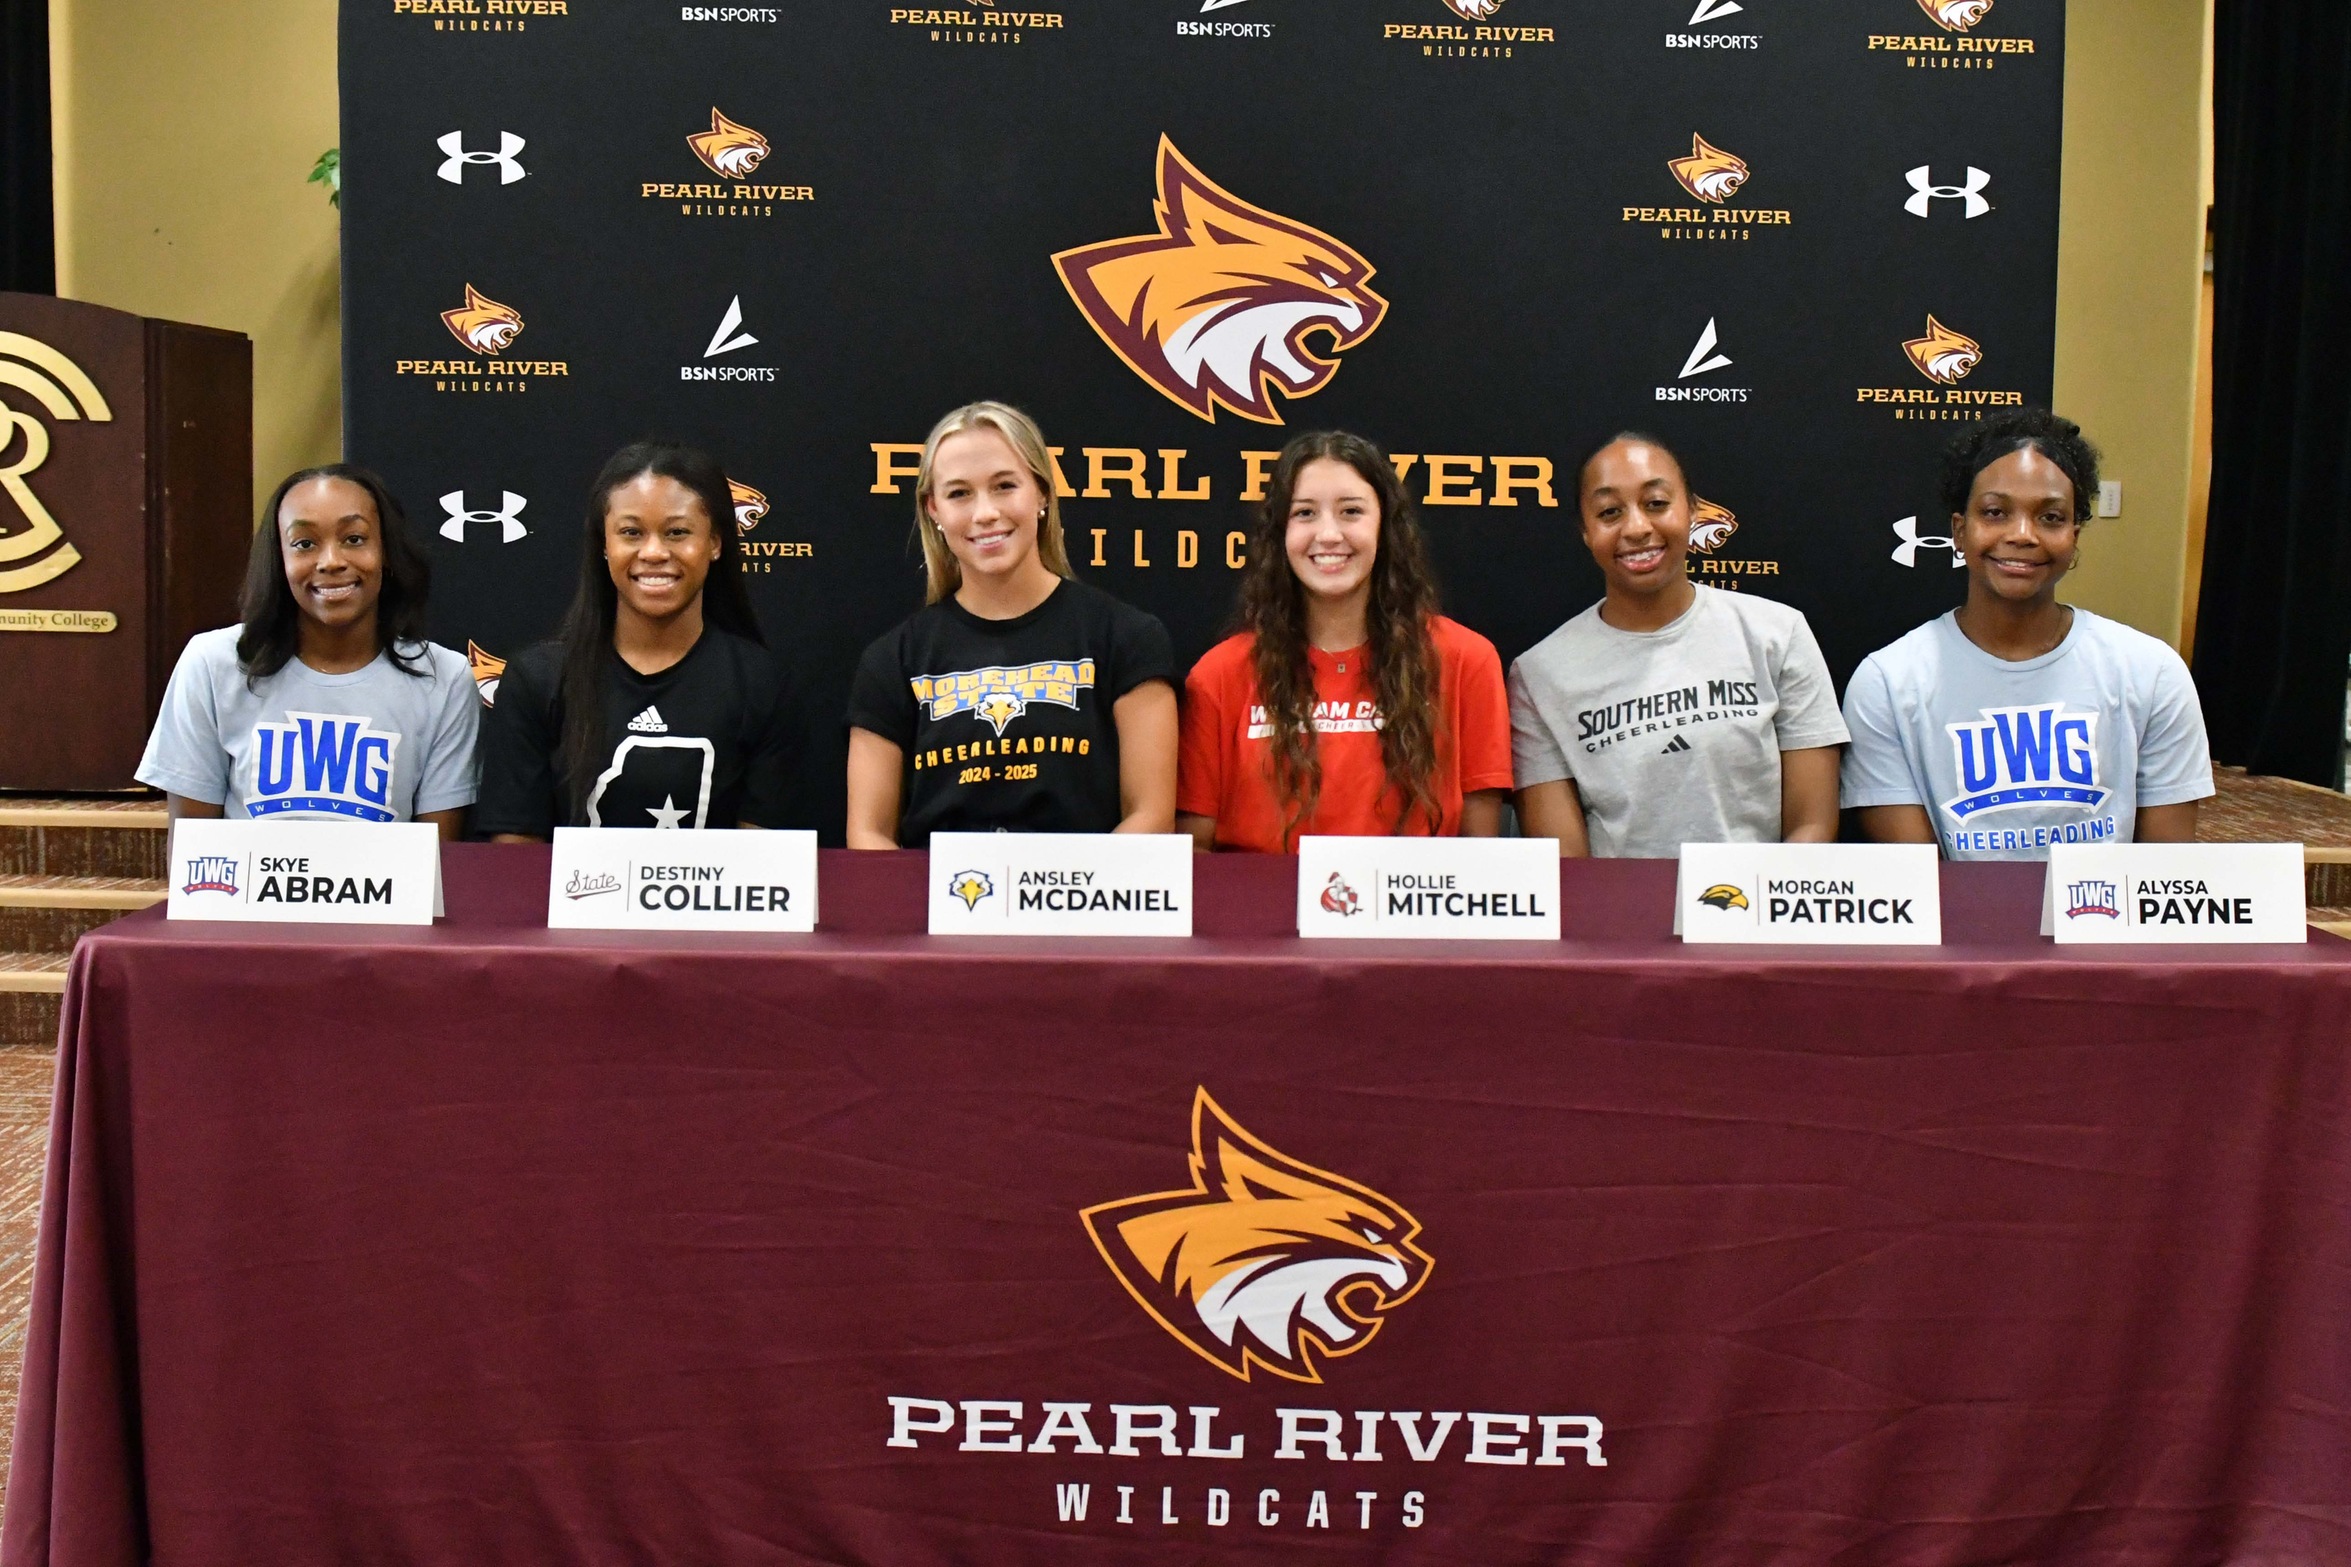 Pearl River cheerleaders signing with four-year institutions, from the left, Skye Abram (Columbia), Destiny Collier (Brandon), Ansley McDaniel (Oxford), Hollie Mitchell (Carriere; Pearl River Central), Morgan Patrick (Brandon) and Alyssa Payne (Magee).